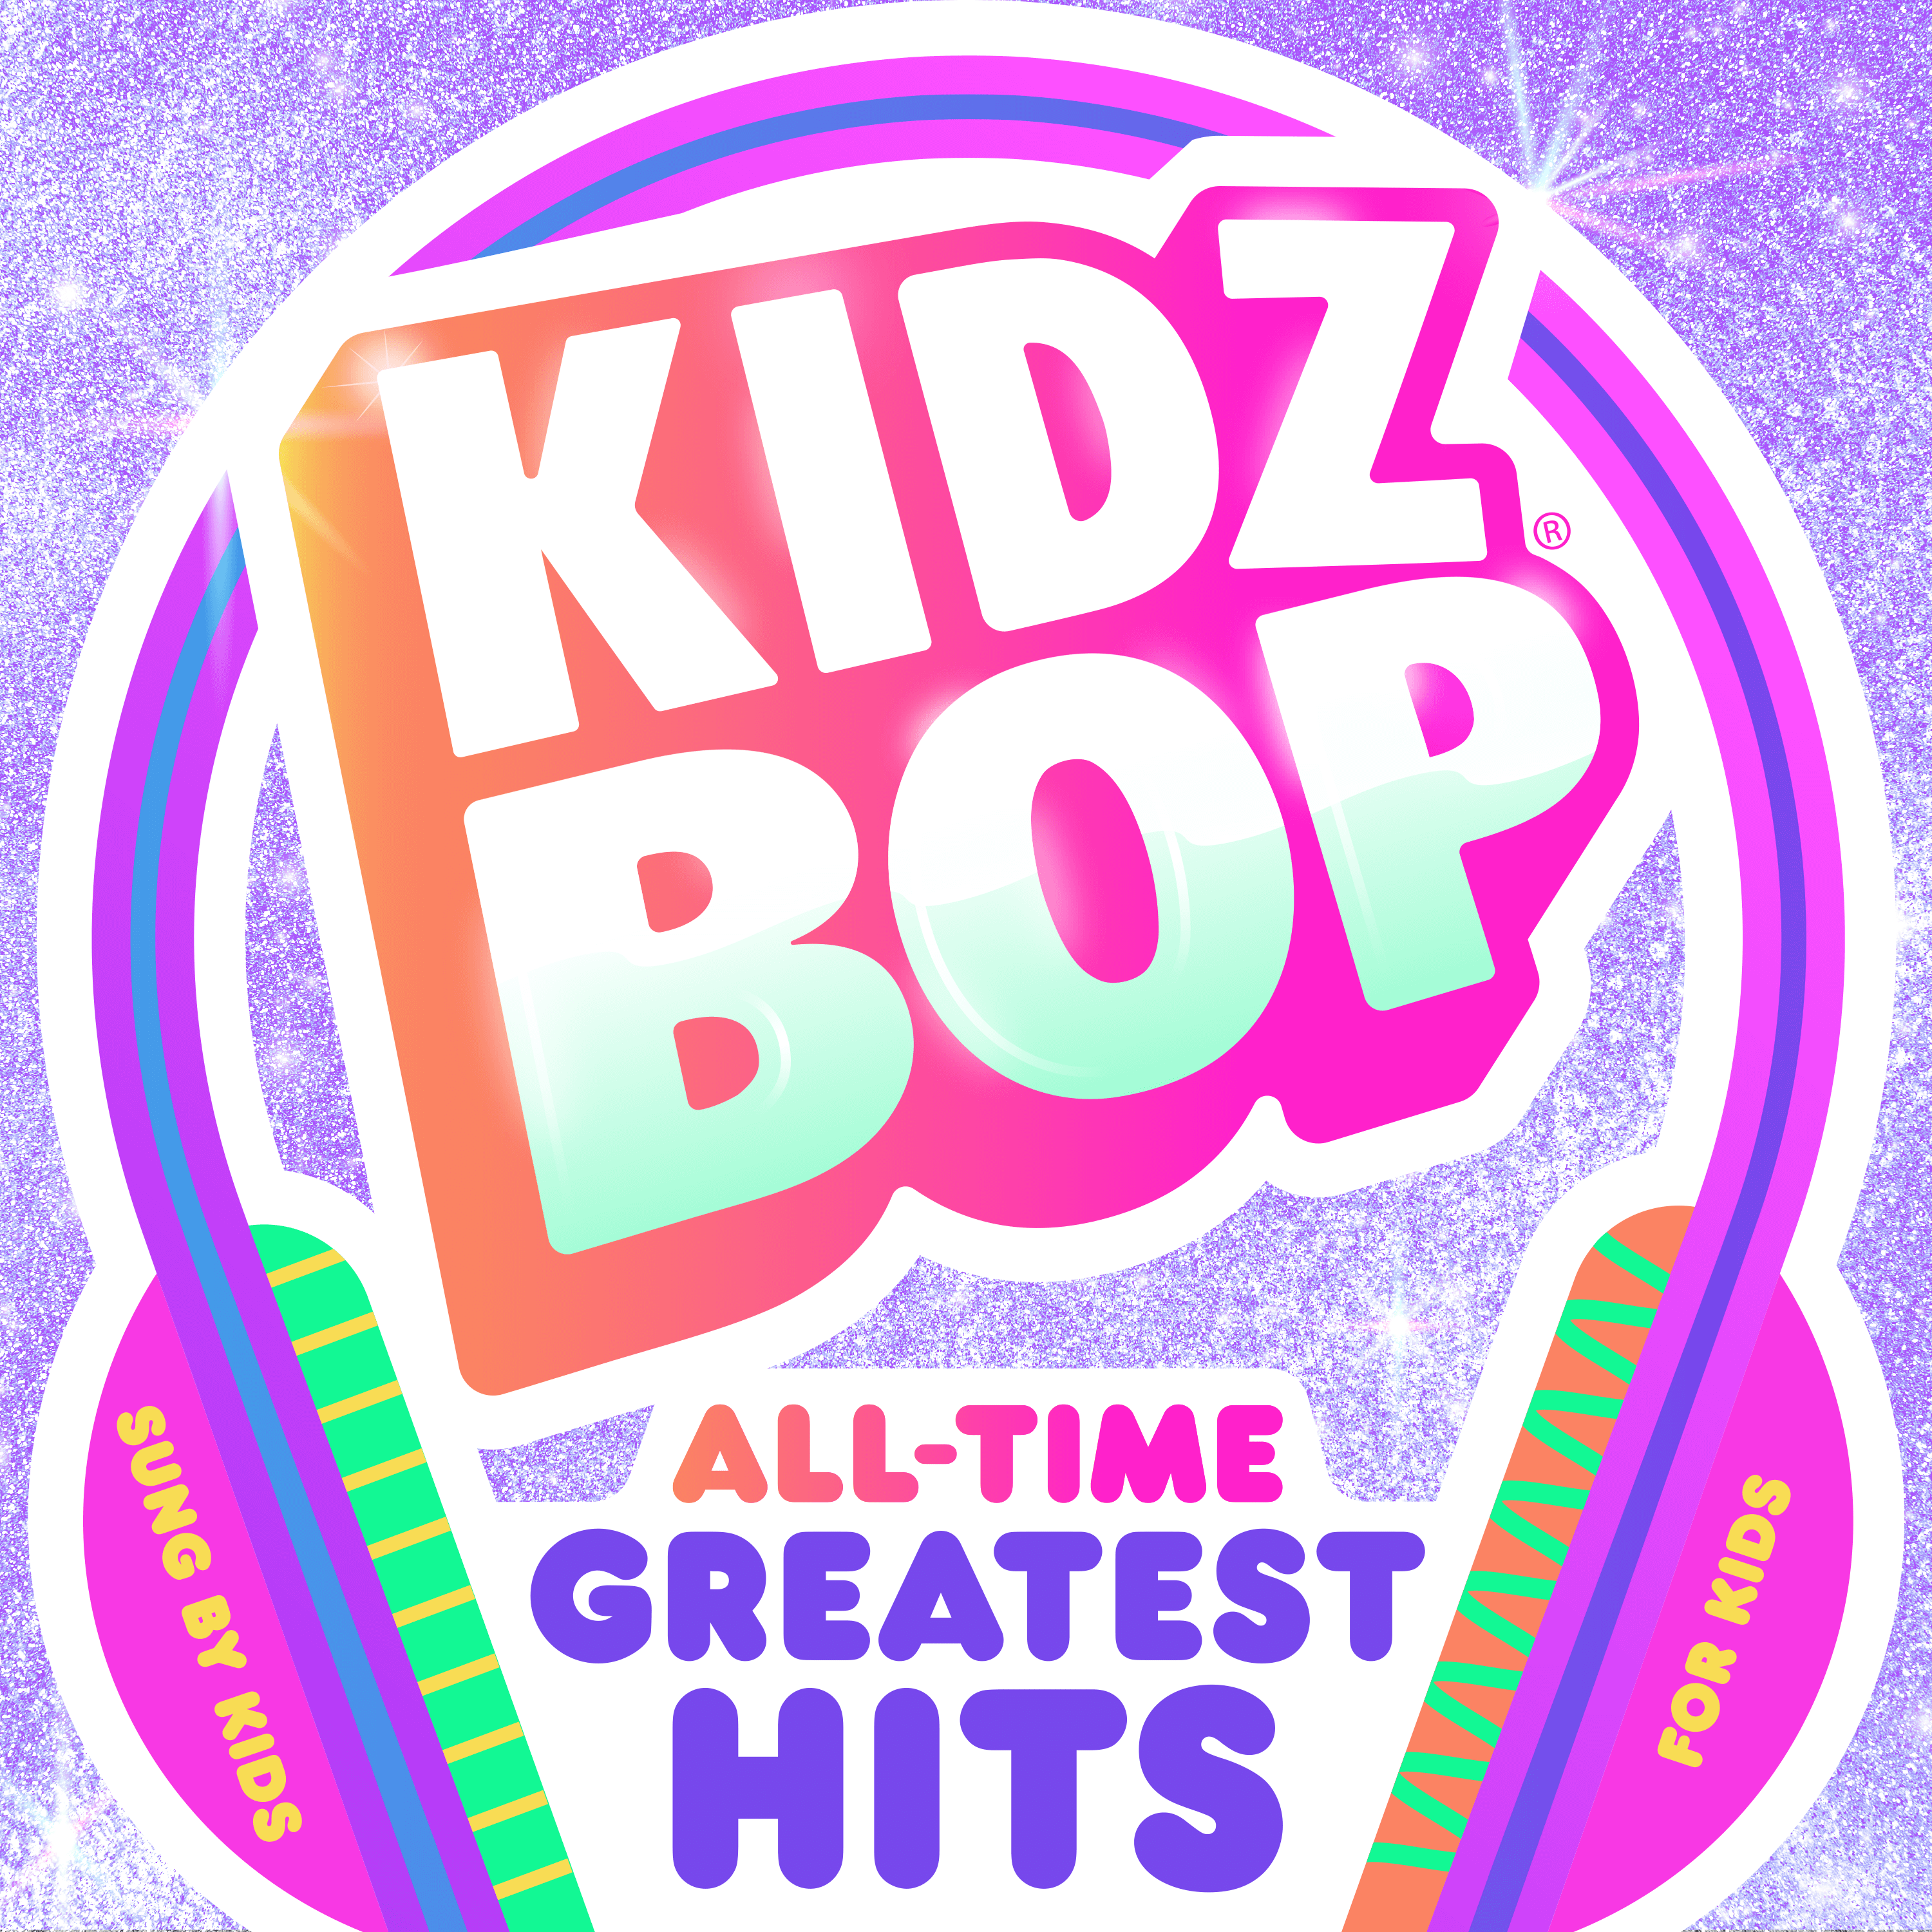 Featured image for “KIDZ BOP ALL-TIME GREATEST HITS”